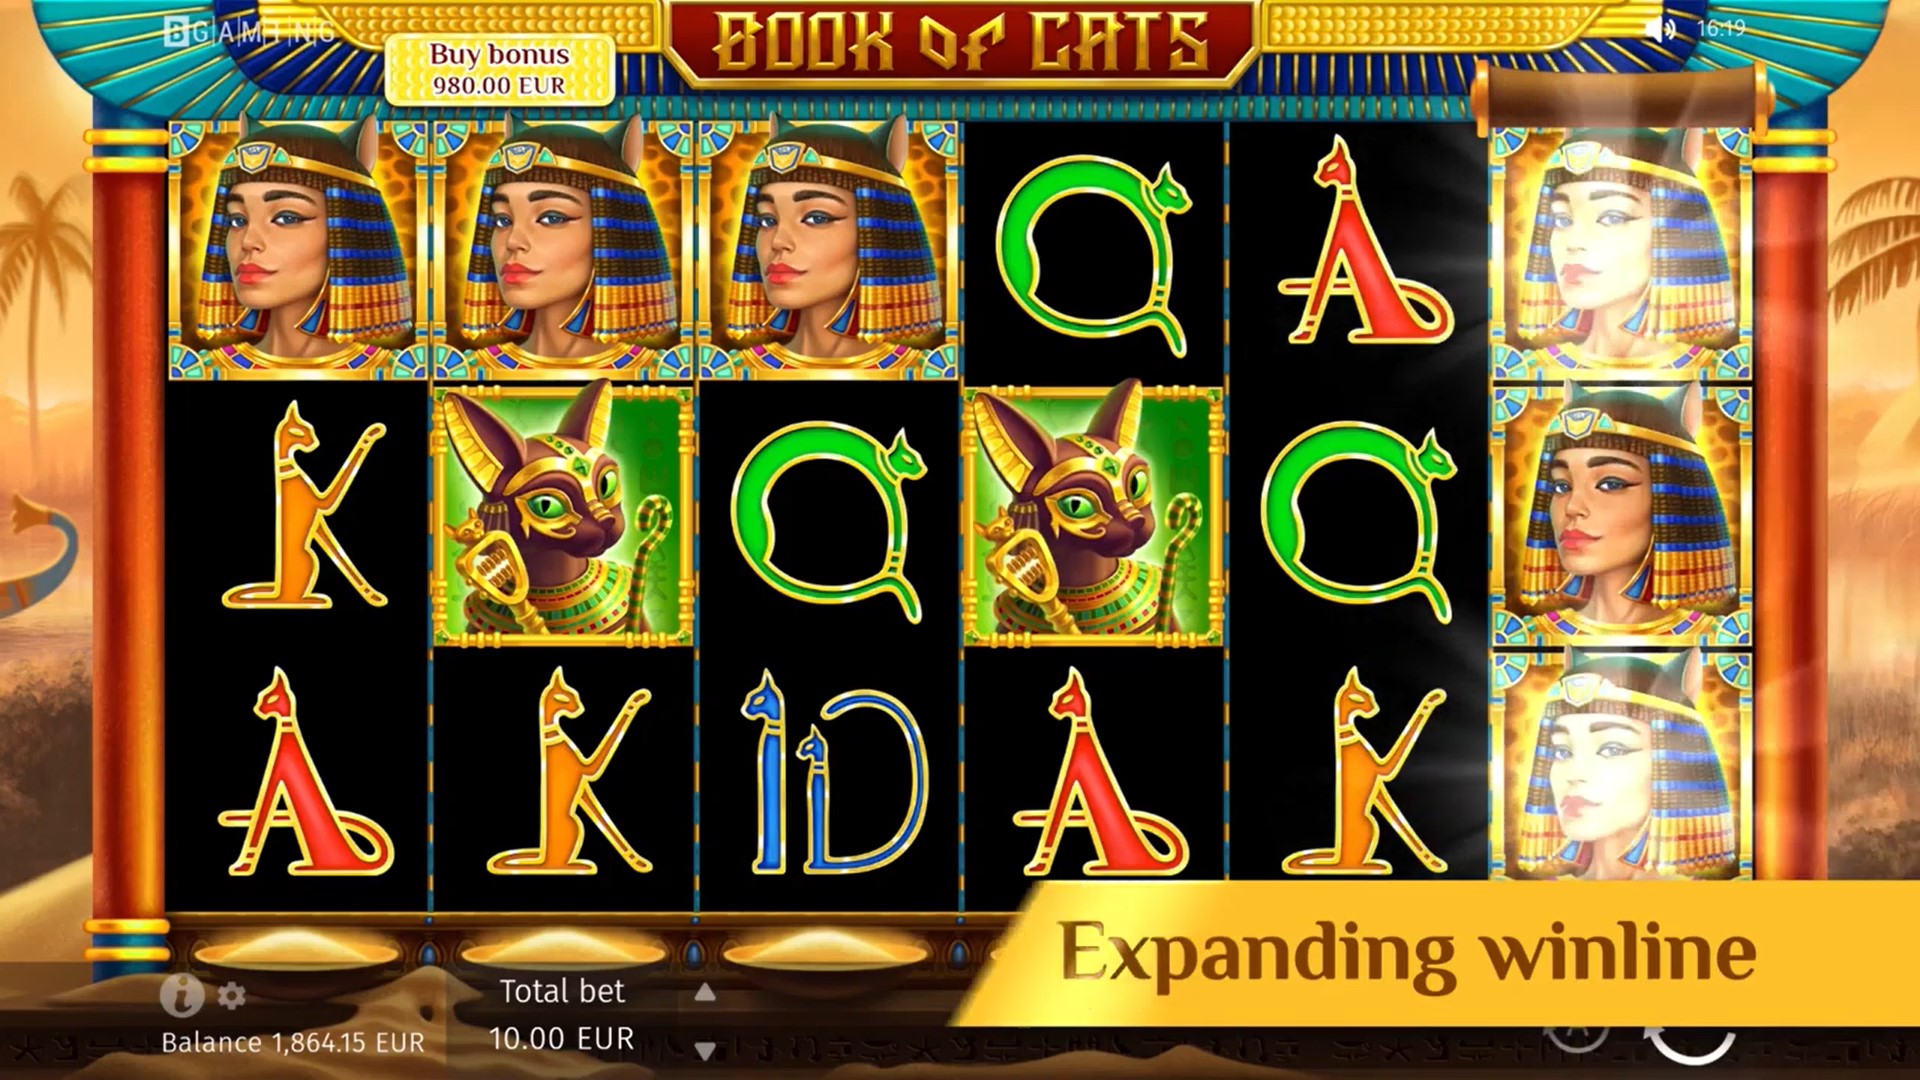 Book of Cats wild BGaming